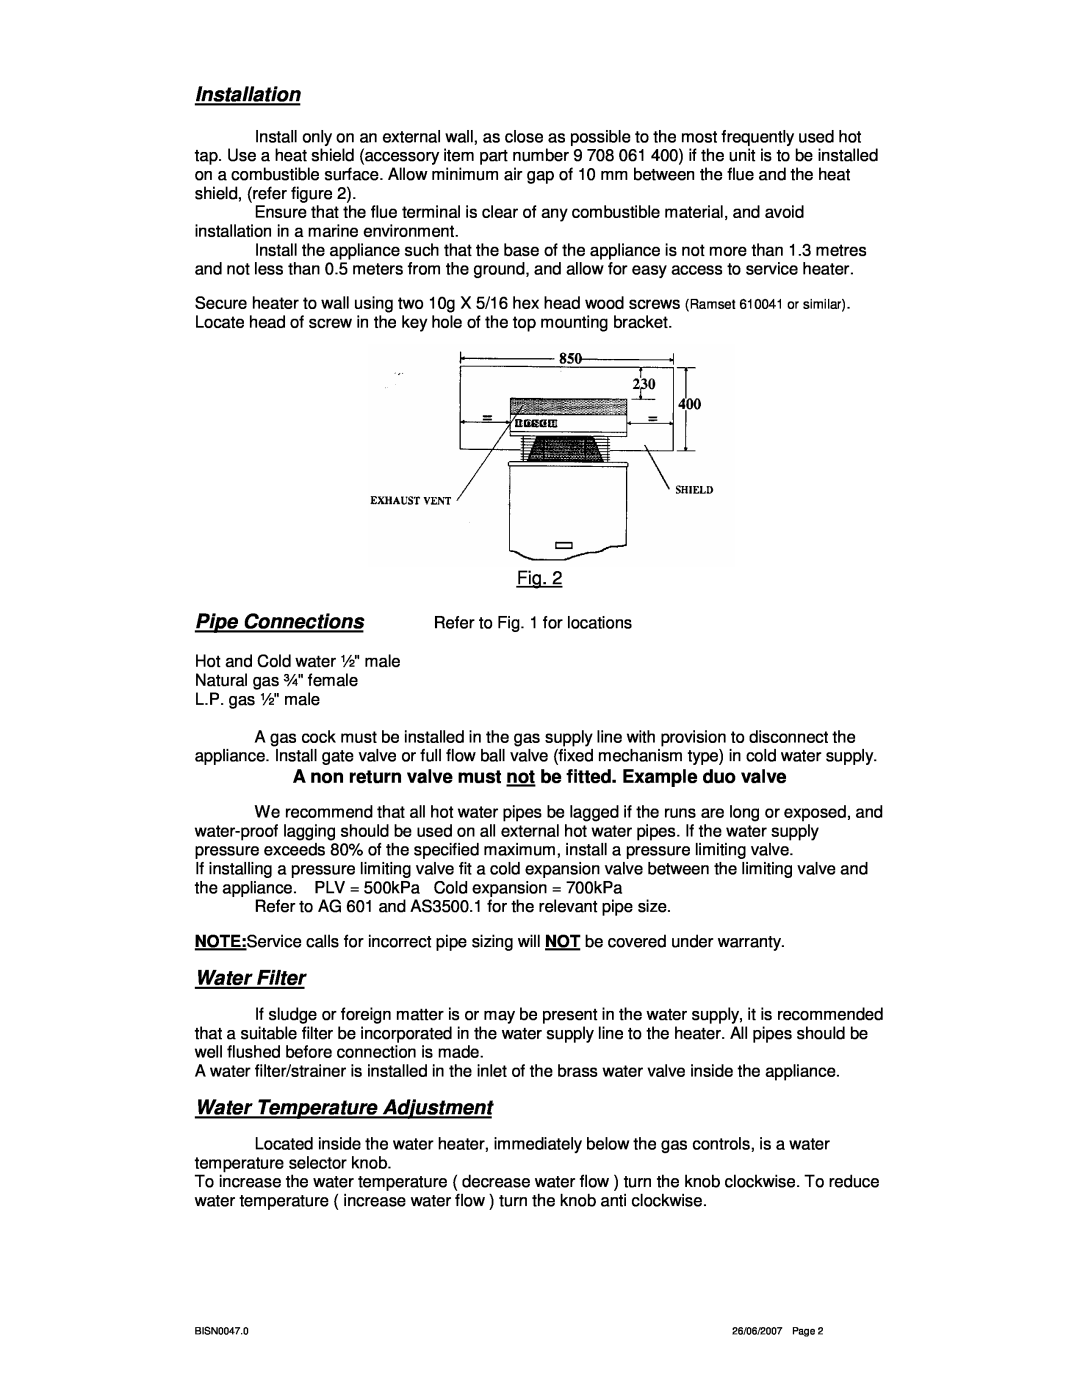 Bosch Appliances 600 operating instructions Installation, Pipe Connections, Water Filter, Water Temperature Adjustment 